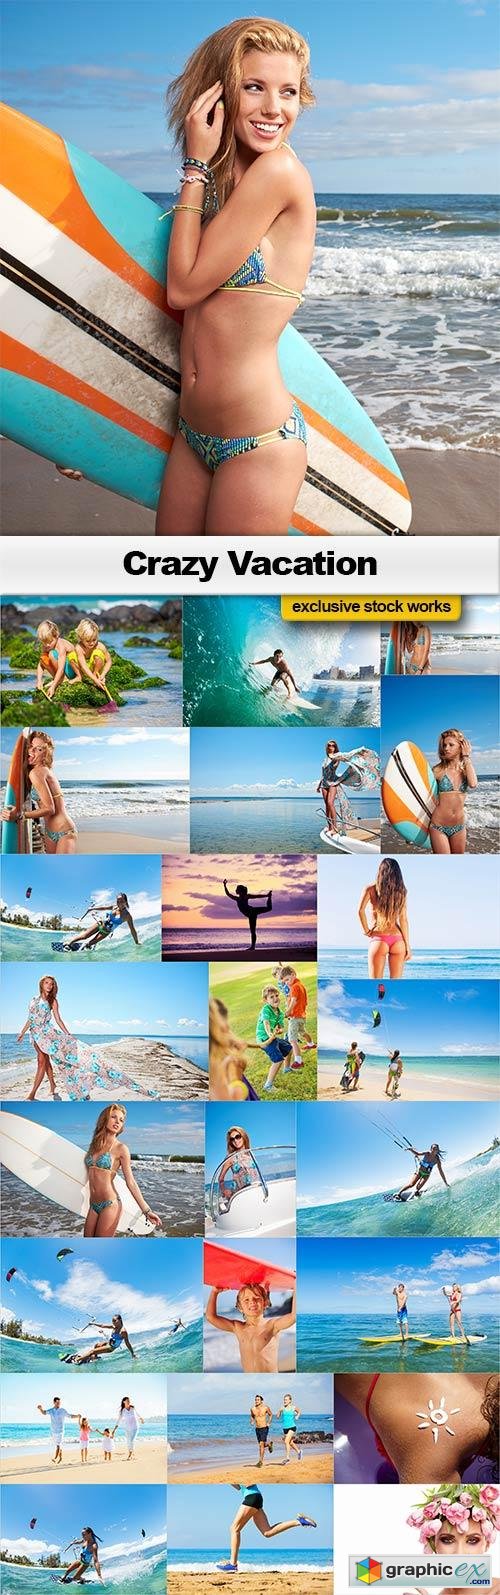 Crazy Vacation - 25x JPEGs